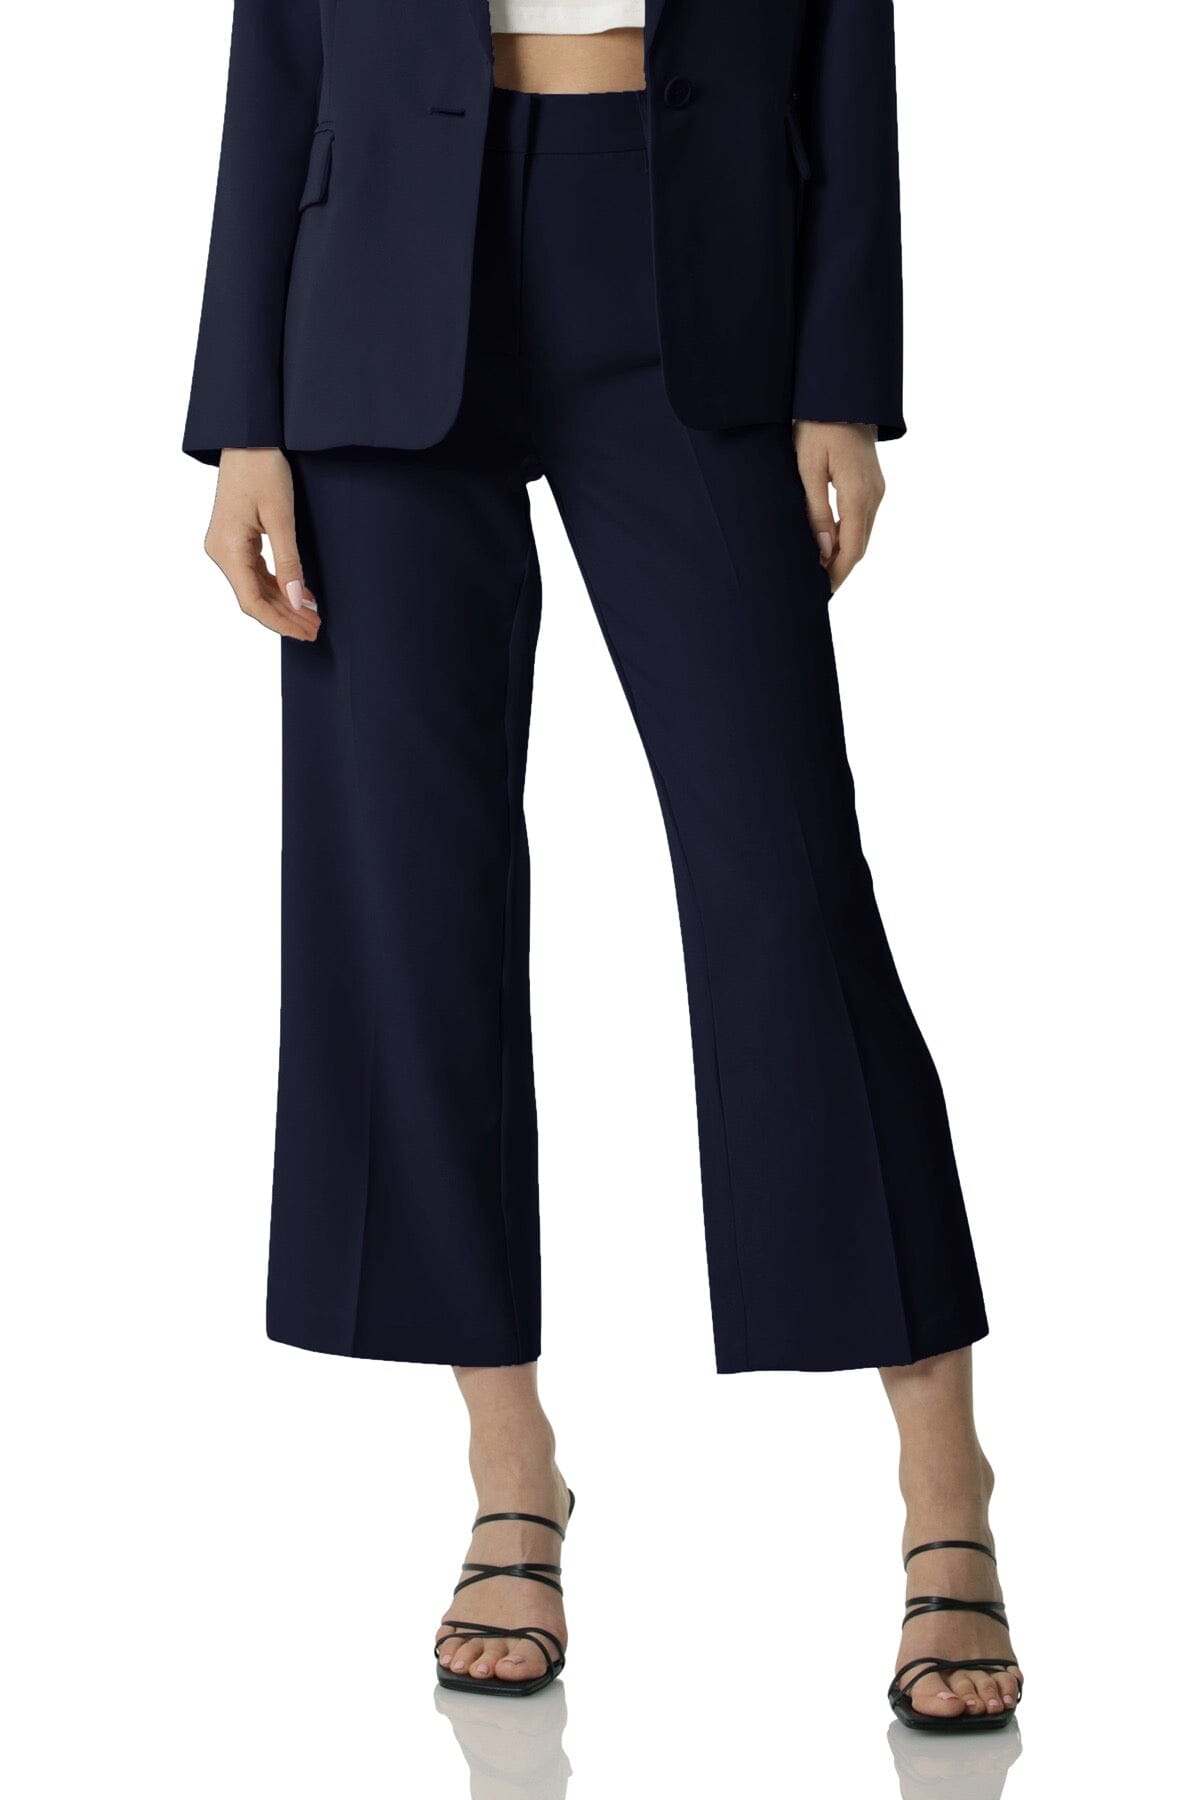 Navy blue figure flattering stretch straight leg cropped trouser trousers for women by Bagatelle